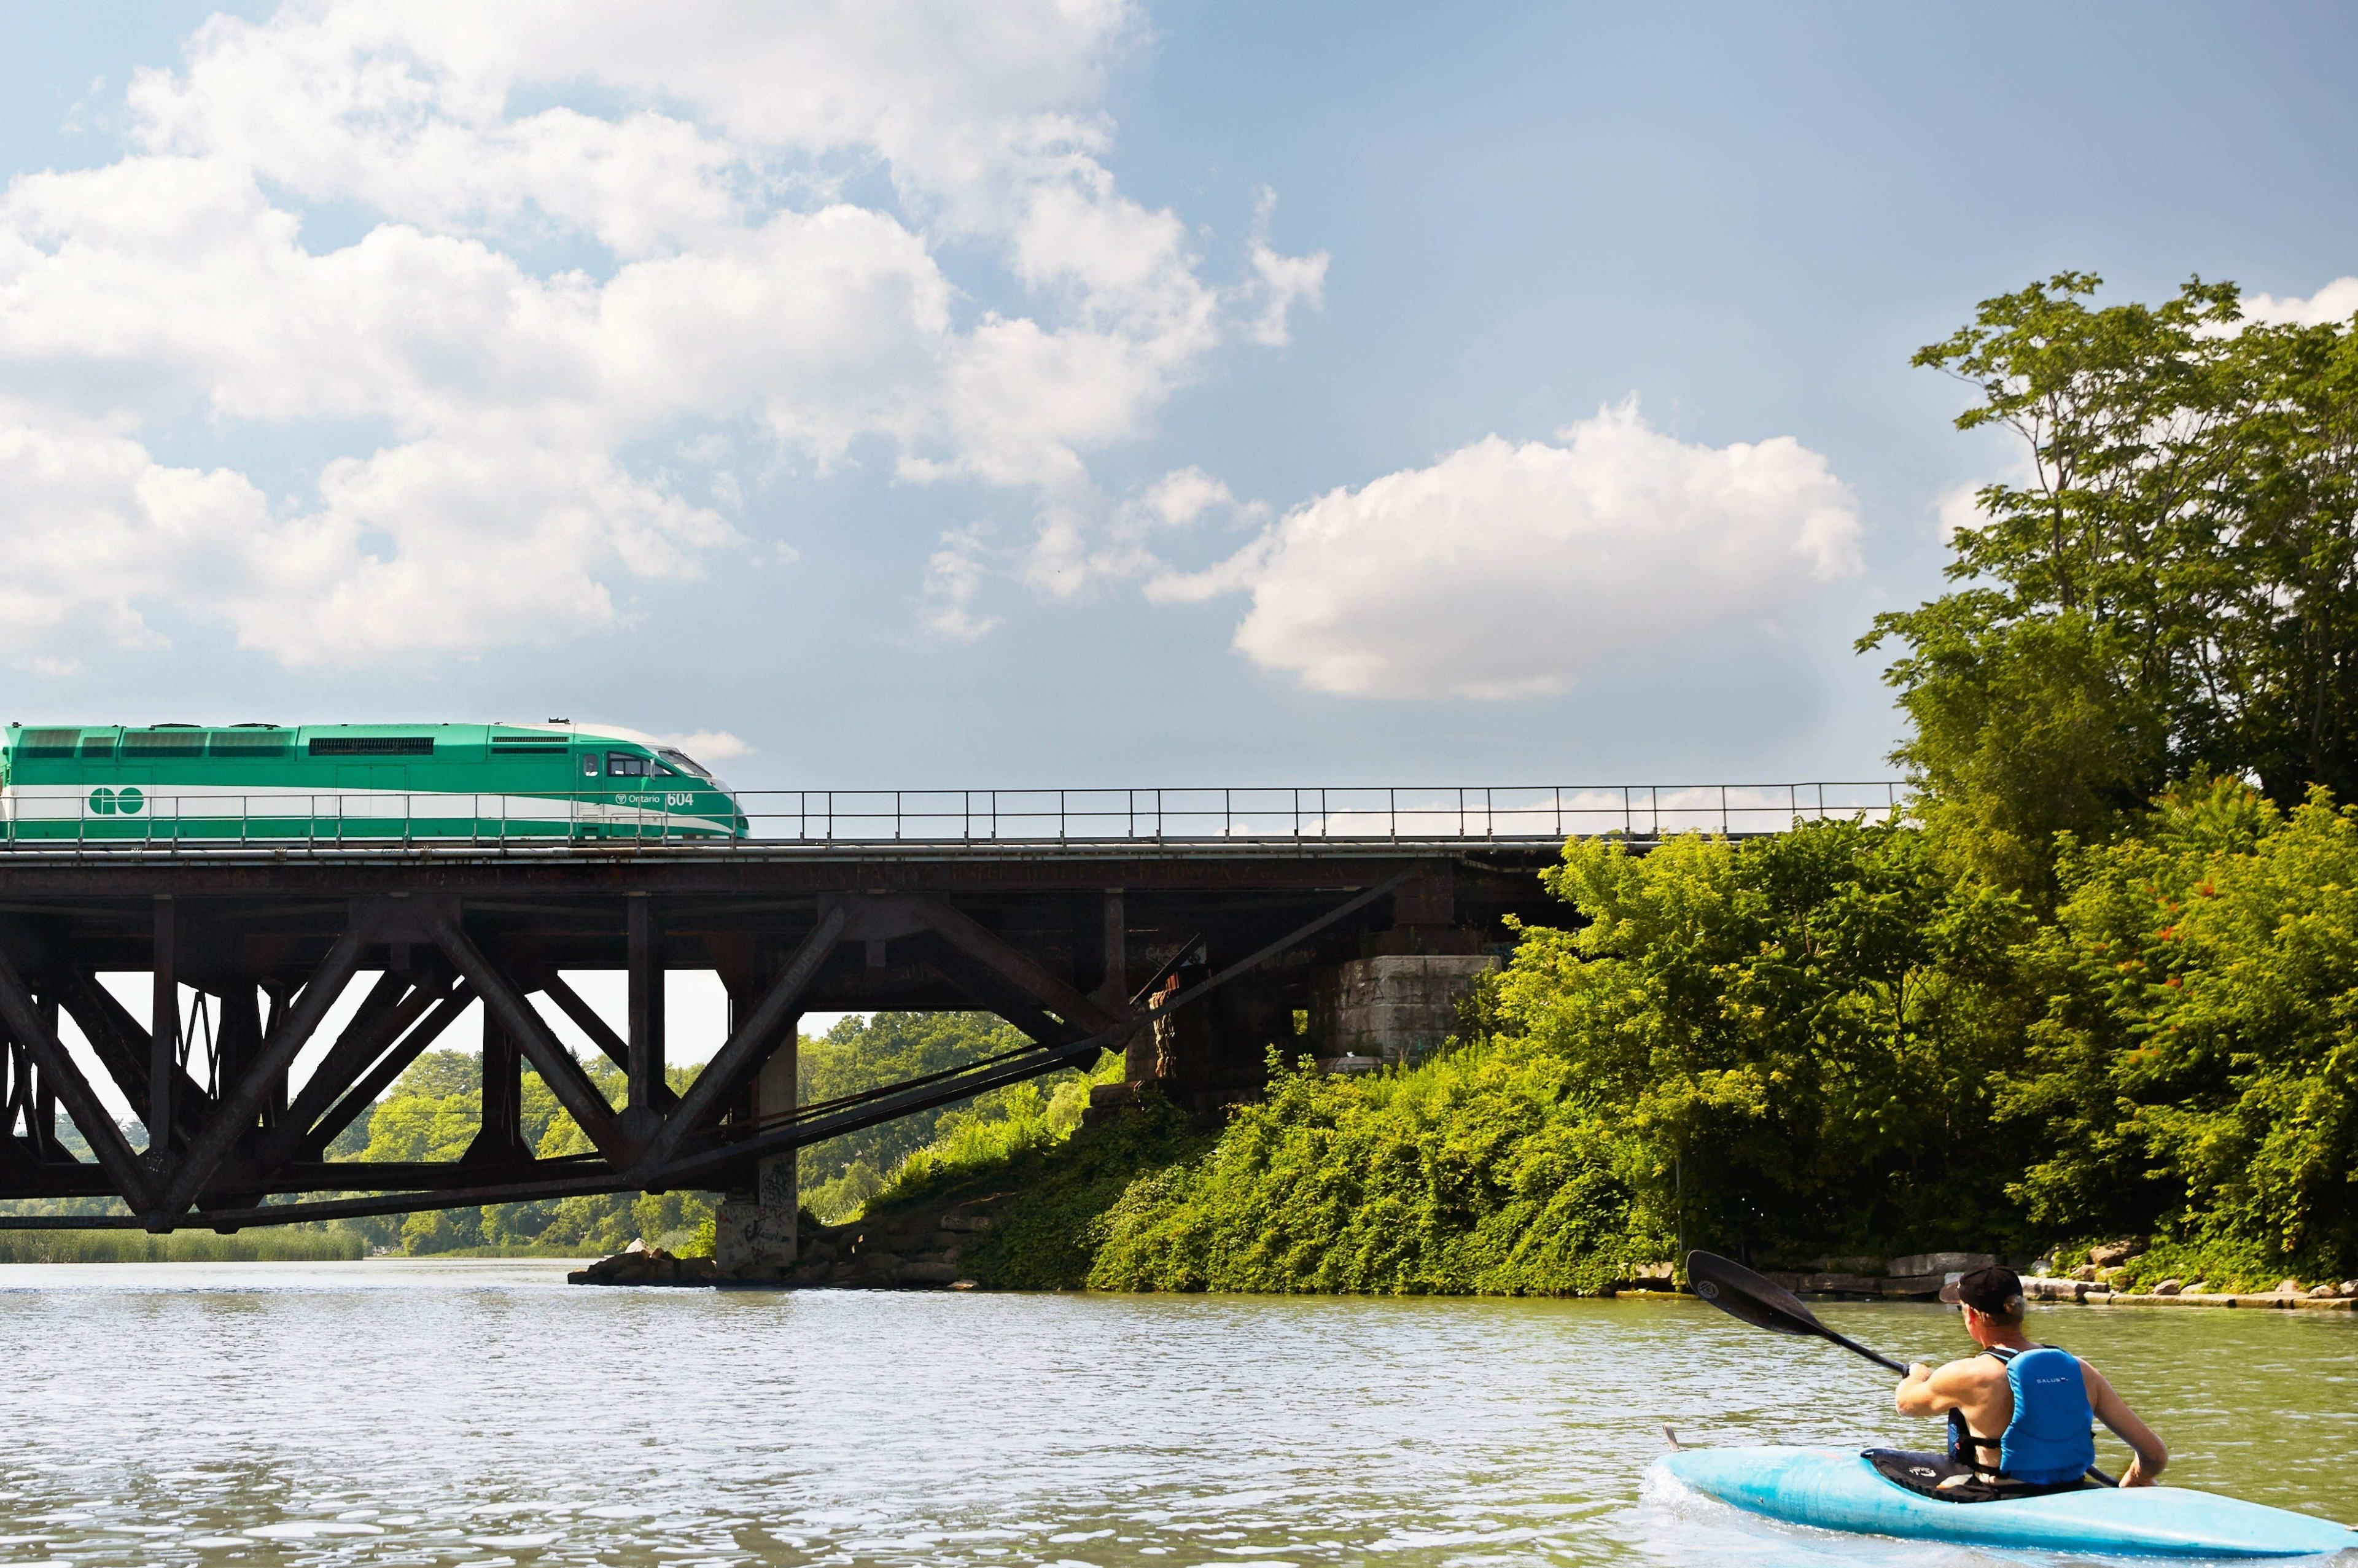 A GO train crosses over a bridge as man paddles a kyack on a waterway below.